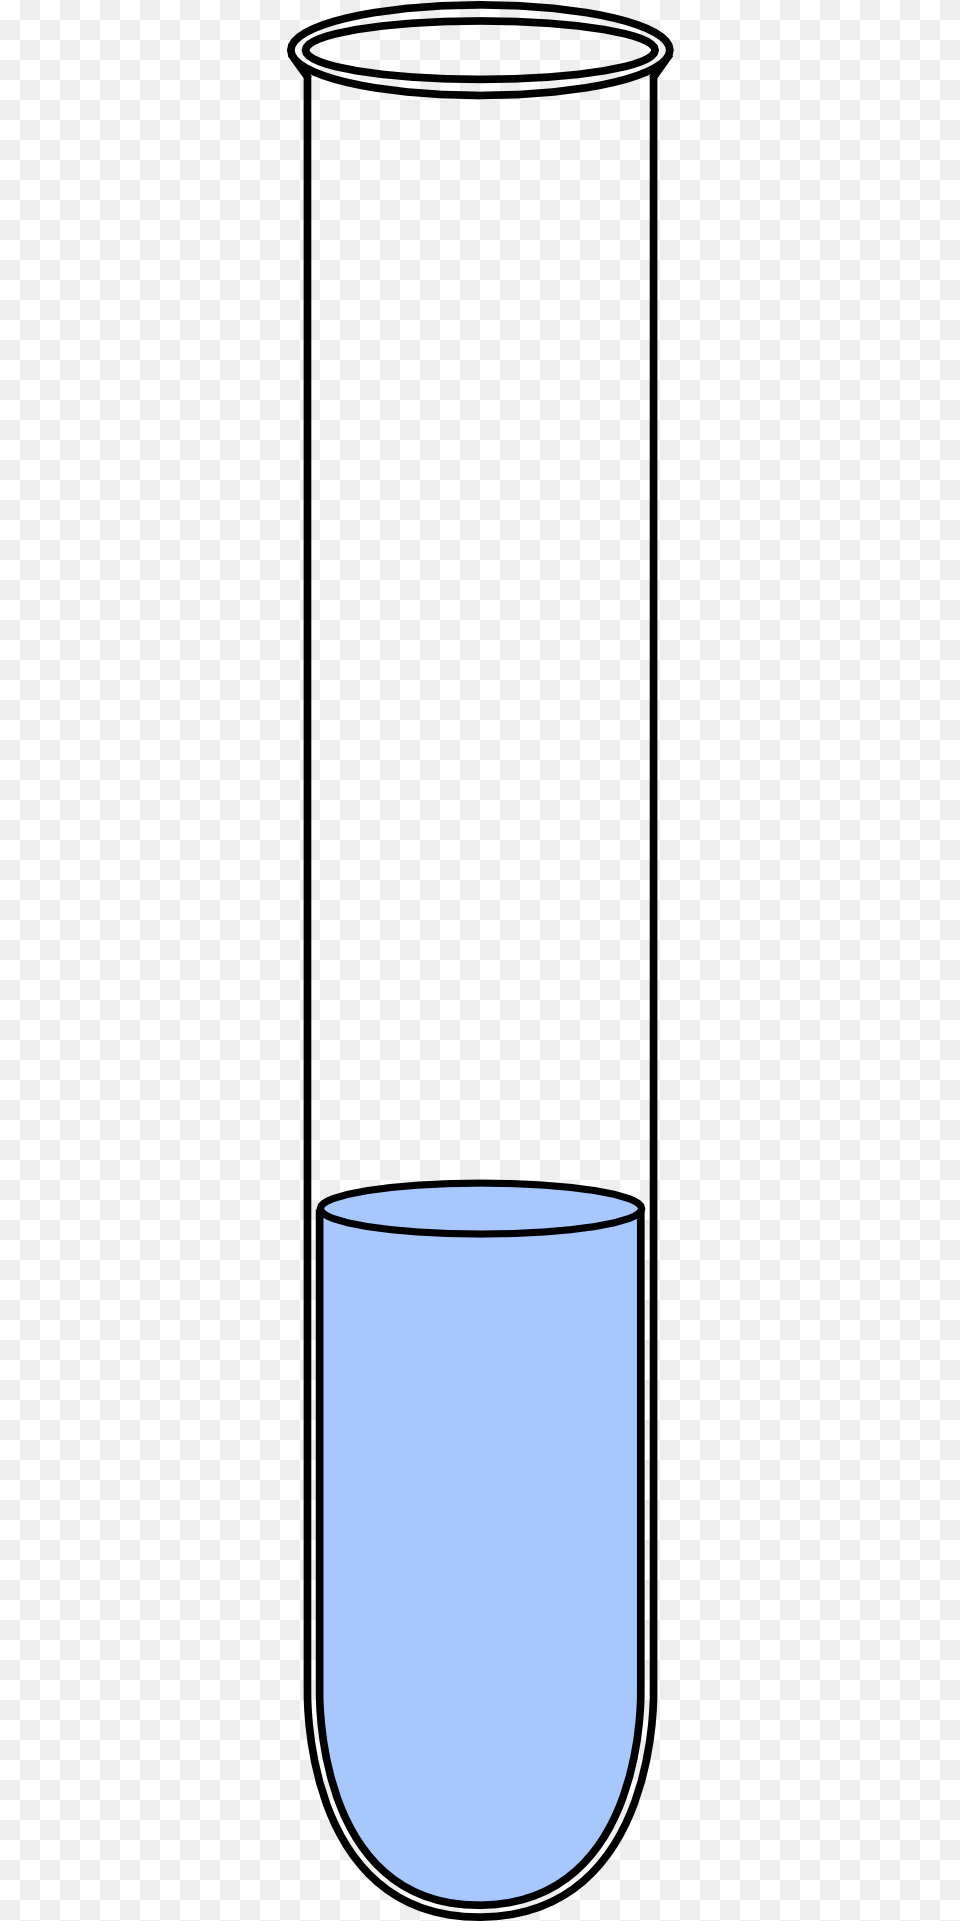 Cylinder, Bowl, Cup Png Image